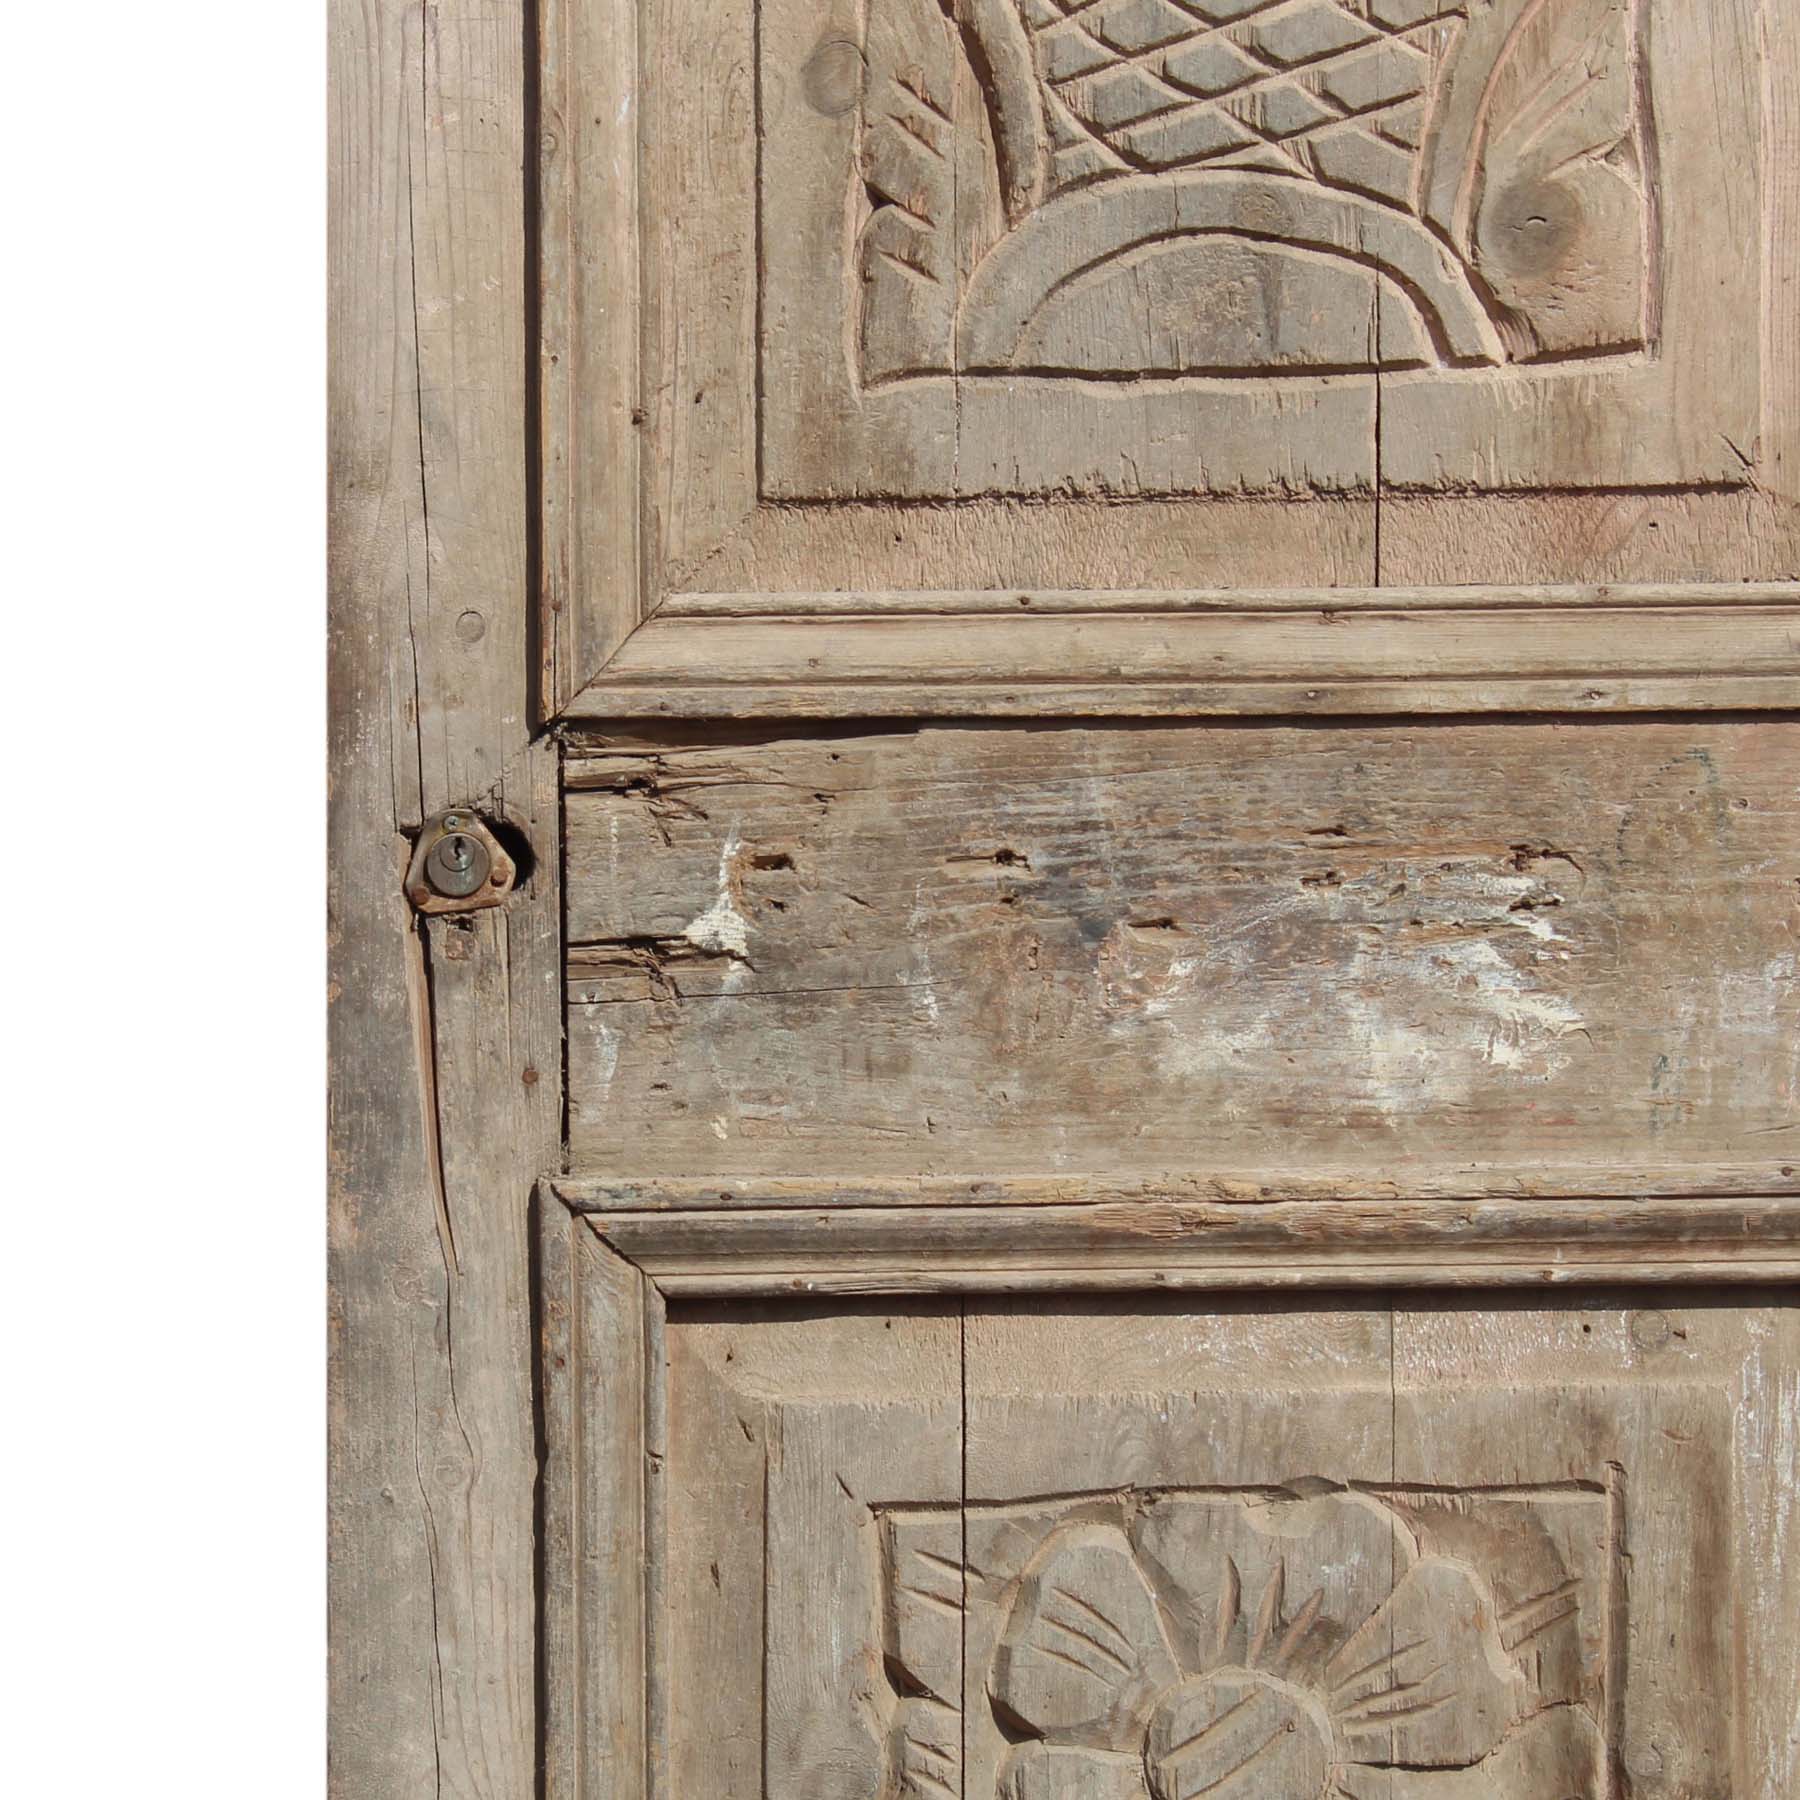 SOLD Salvaged 29” Door with Carved Details-69152